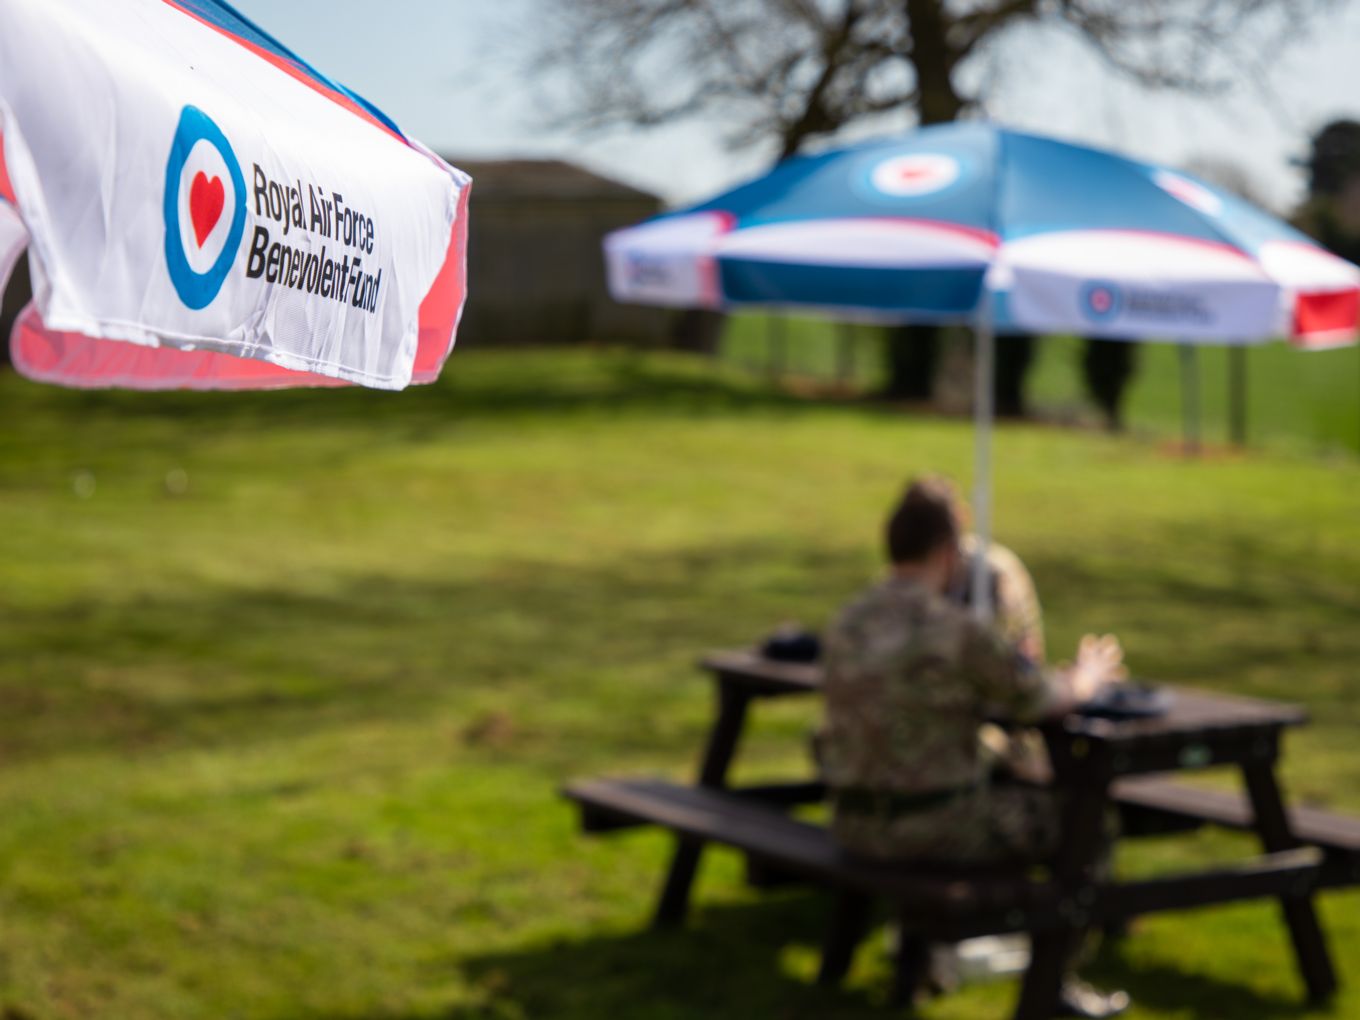 The new benches and RAFBF parasols at RAF Wittering